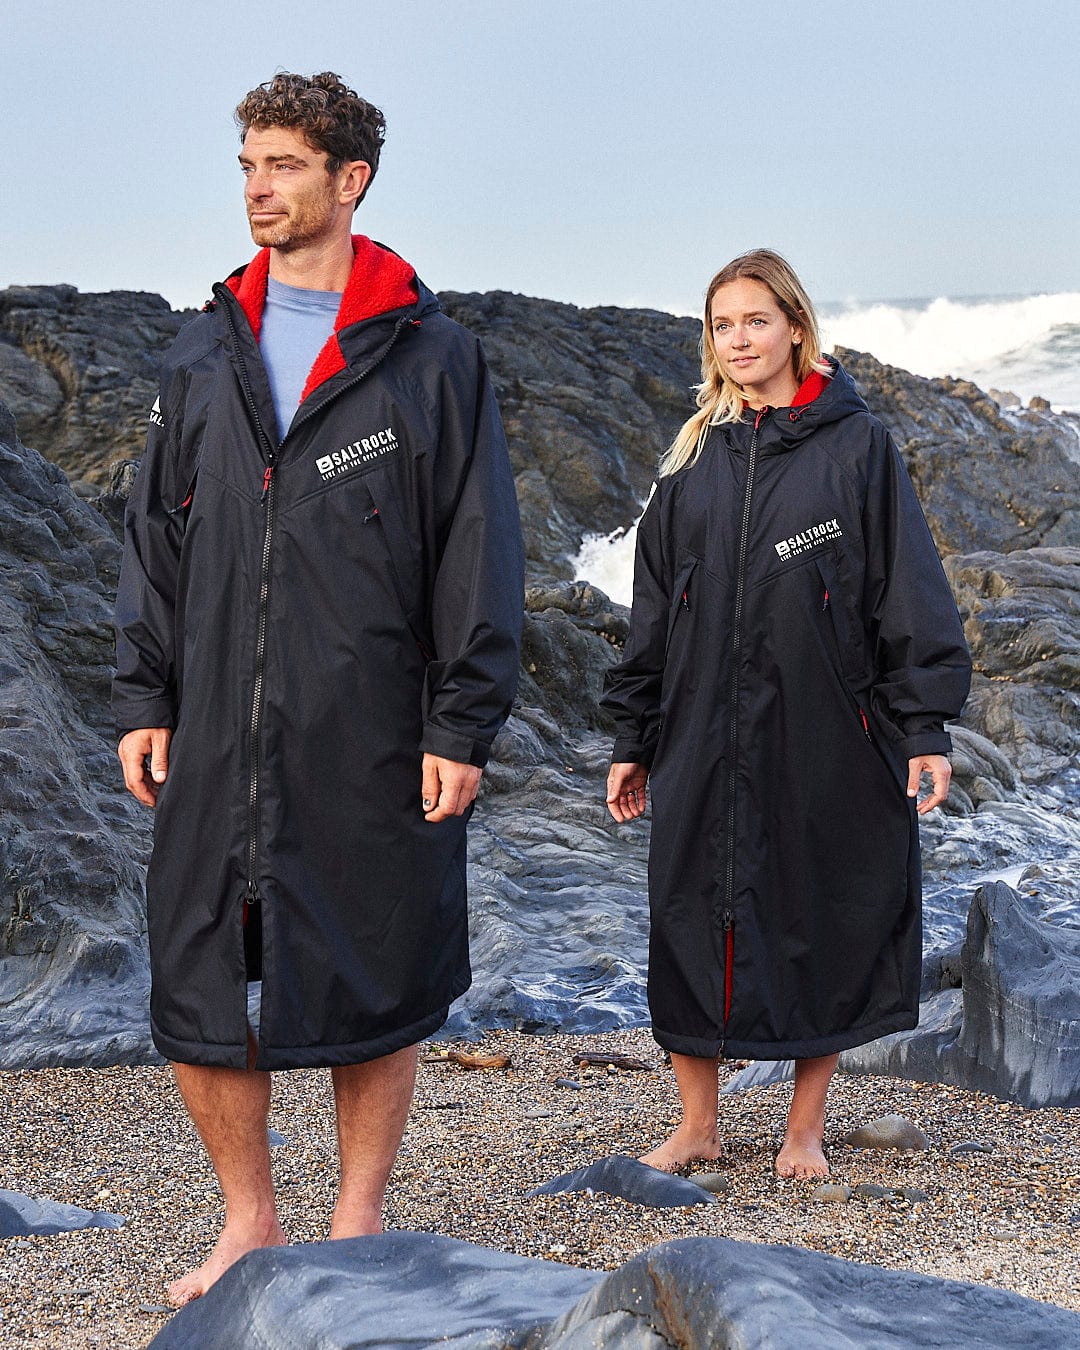 A man and a woman in a Saltrock - Four Seasons Waterproof Changing Robe - Black/Red standing on a rocky beach.